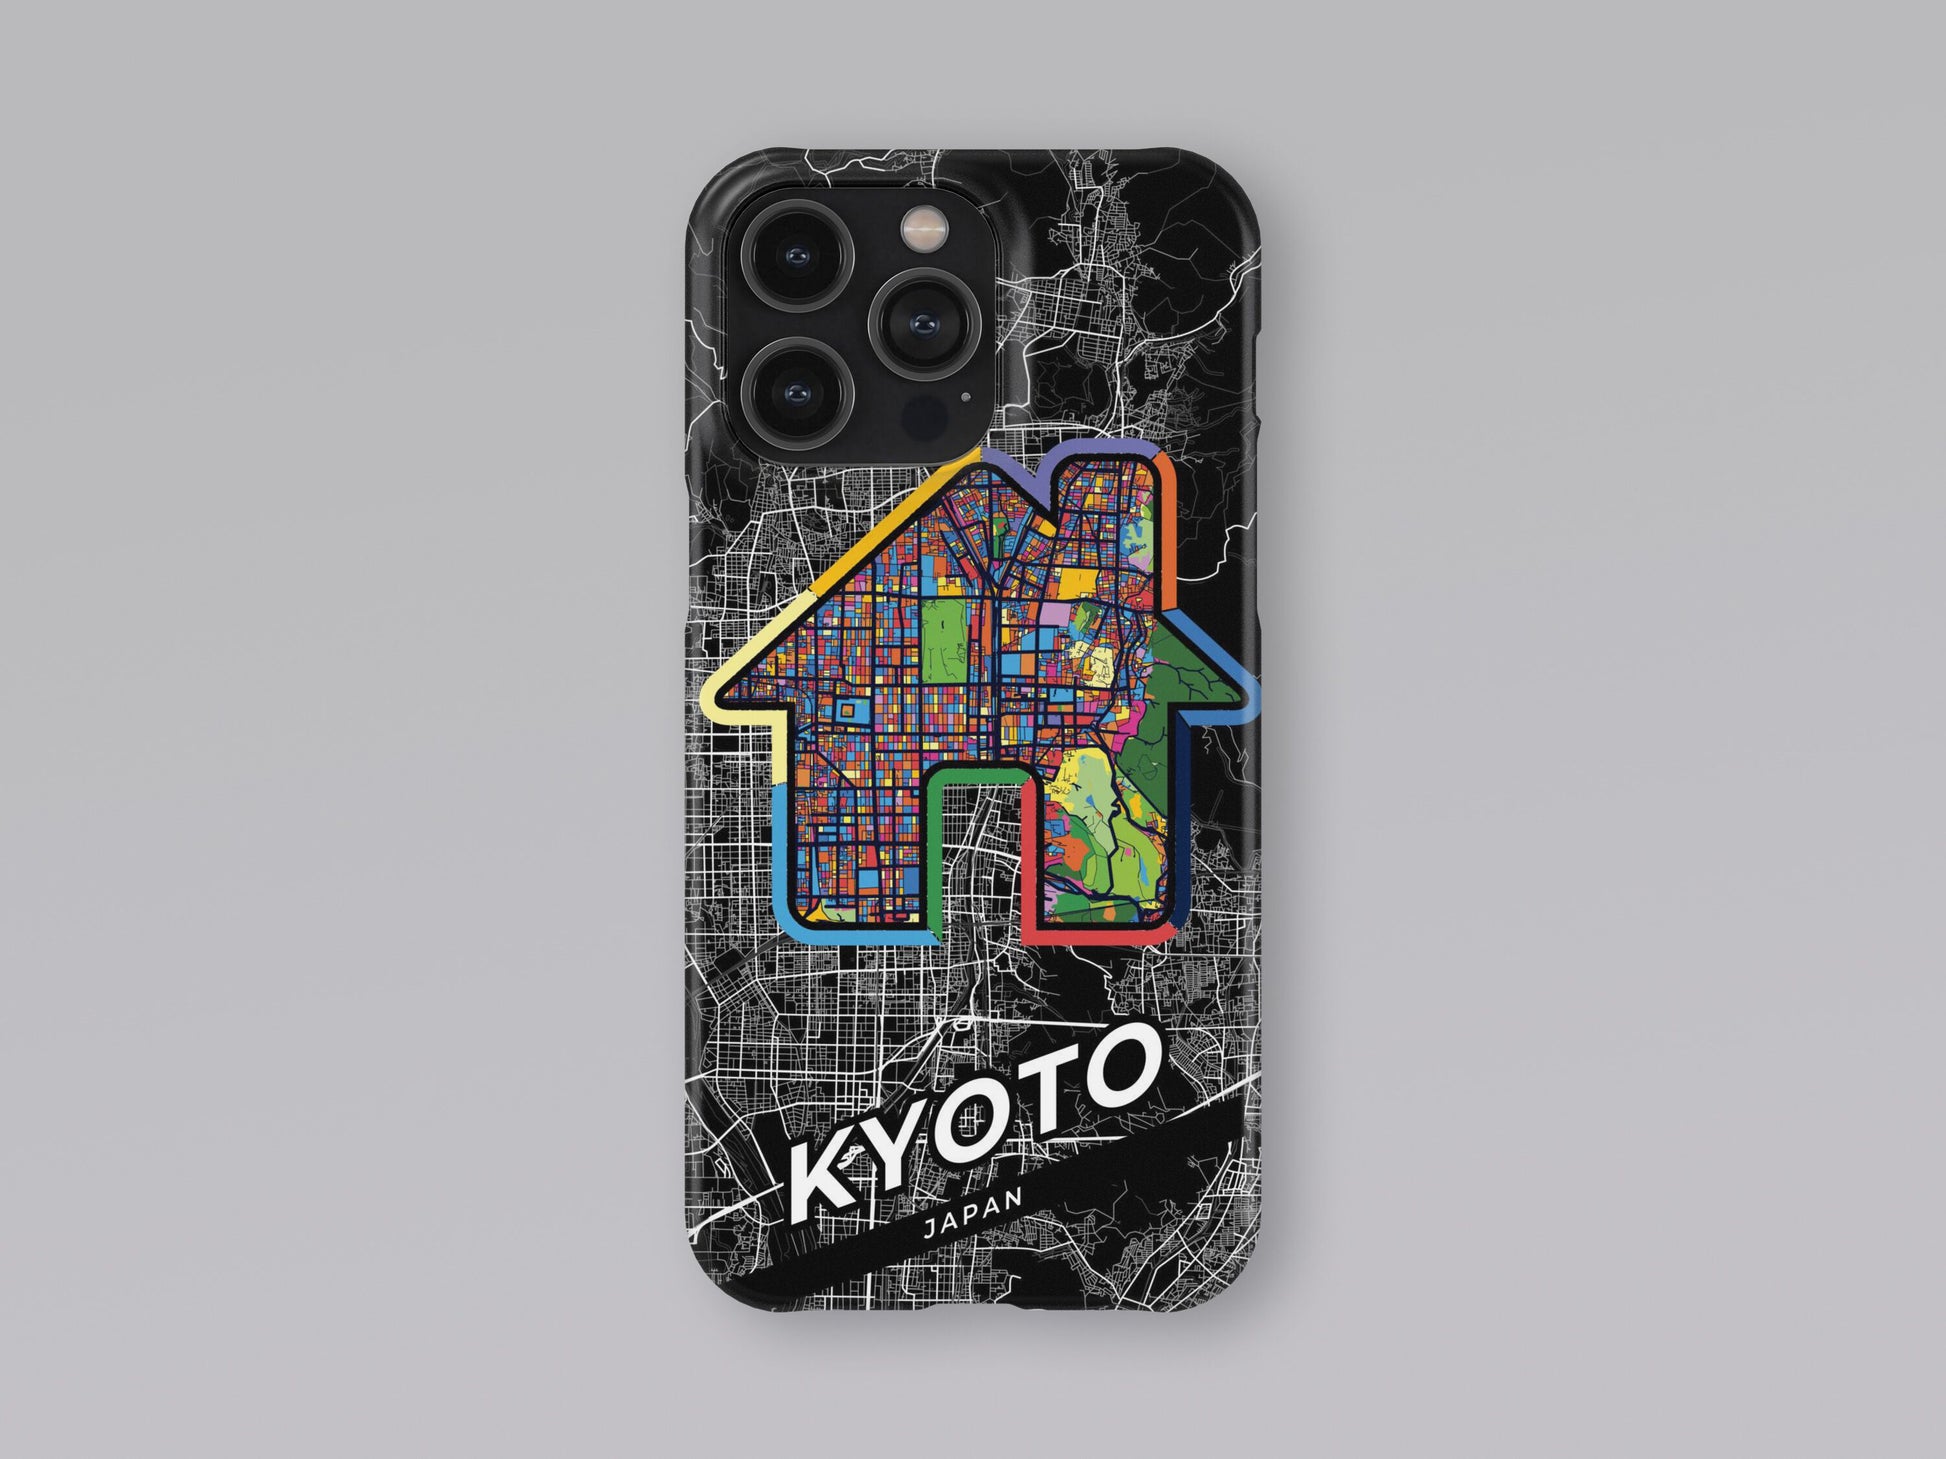 Kyoto Japan slim phone case with colorful icon. Birthday, wedding or housewarming gift. Couple match cases. 3